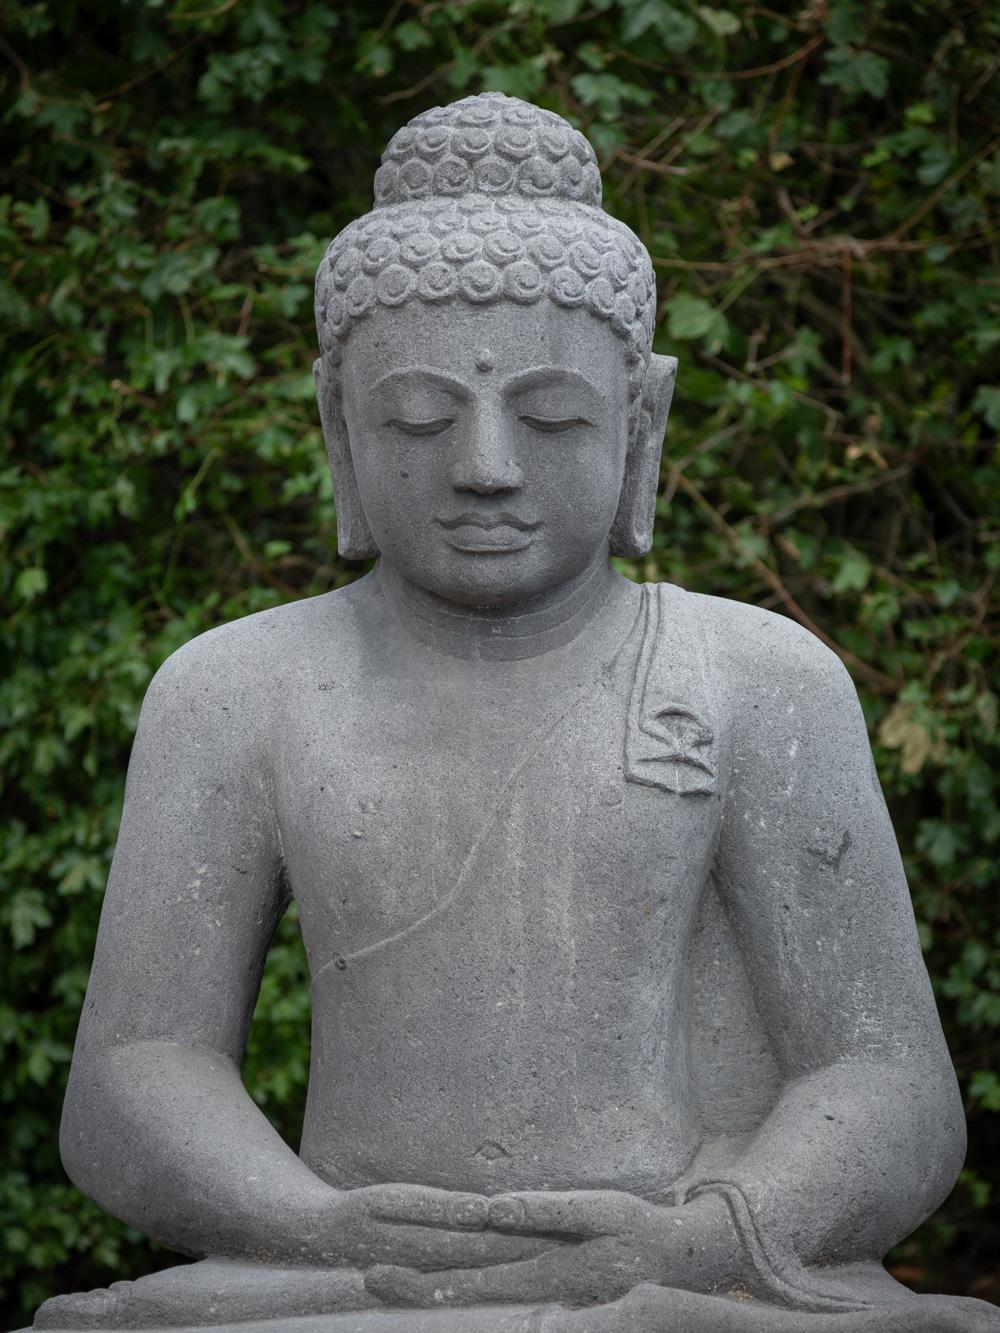 This large lavastone Buddha statue is a magnificent and spiritually significant work of art. It stands at an impressive height of 113 cm, with dimensions of 90 cm in width and 59 cm in depth. Carved from a single block of lavastone, it embodies the